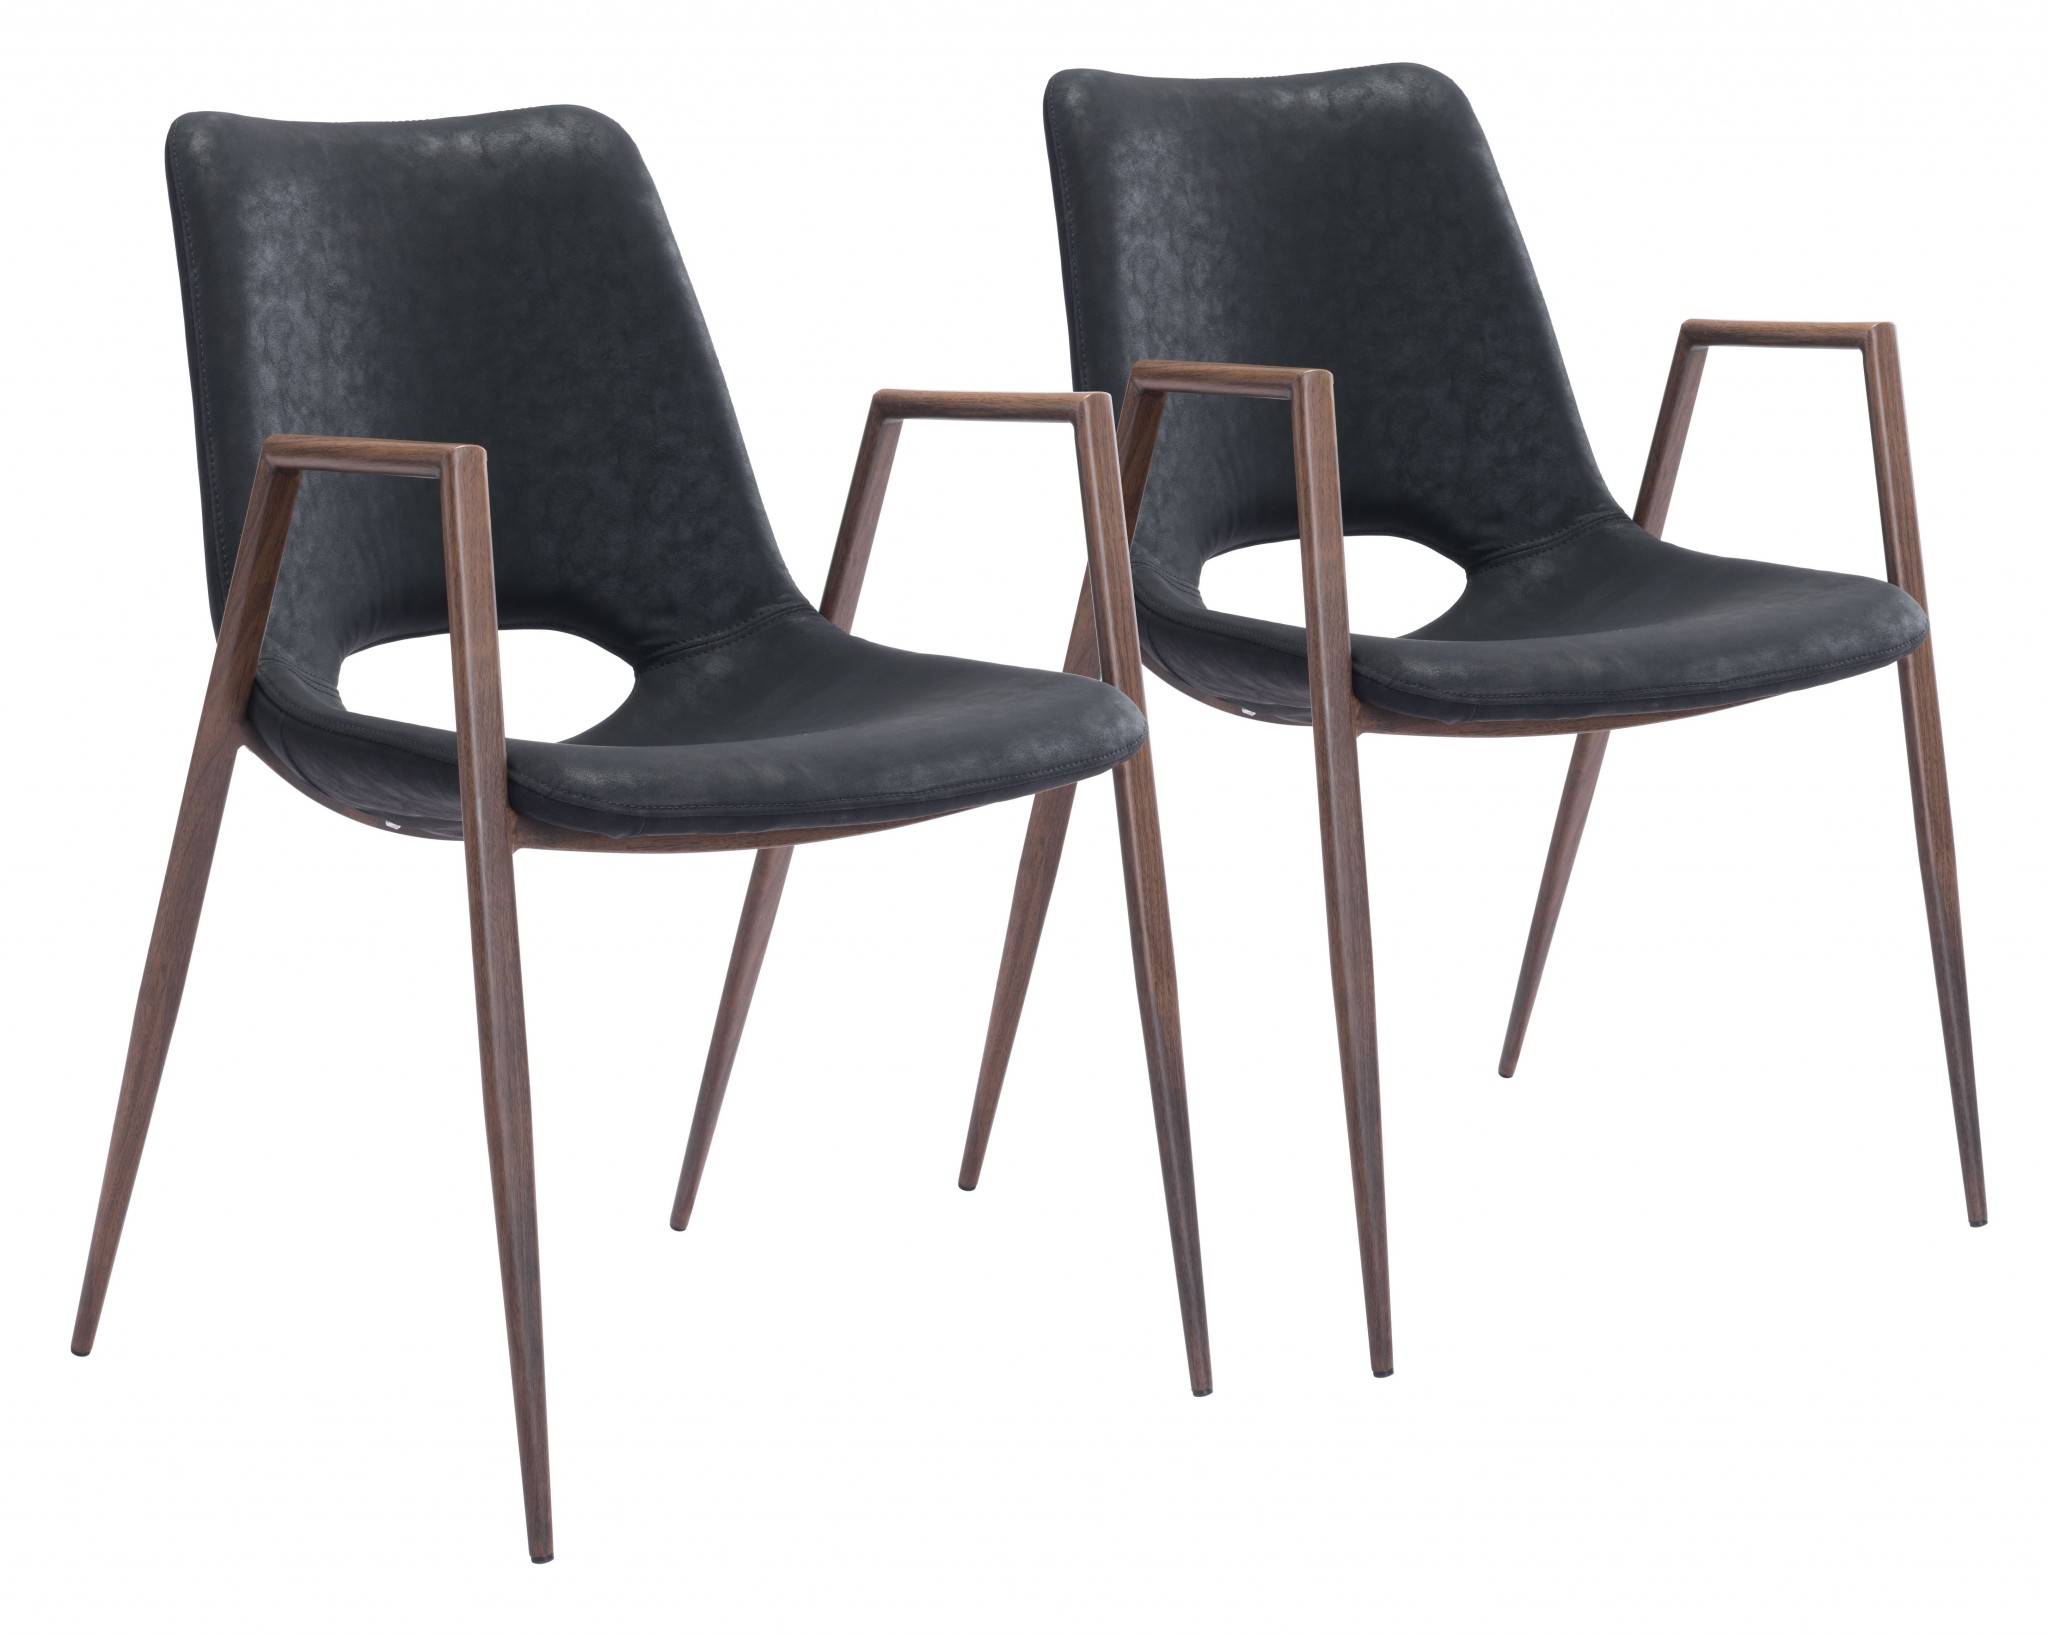 Set of Two Black Retro Modern Funk Dining Chairs